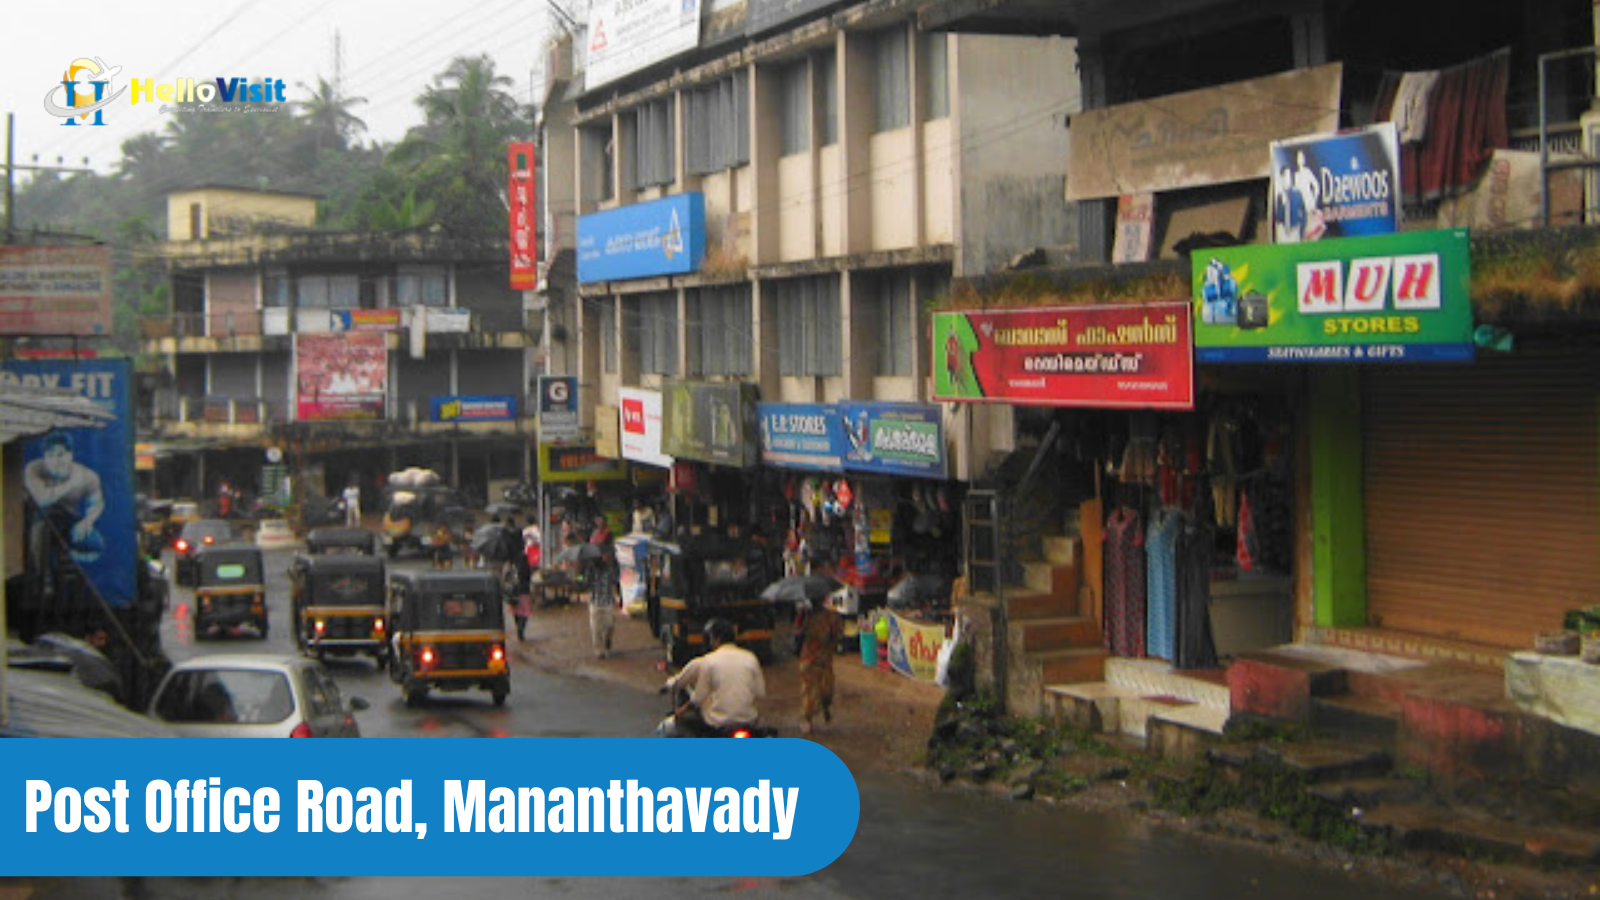 Post Office Road, Mananthavady